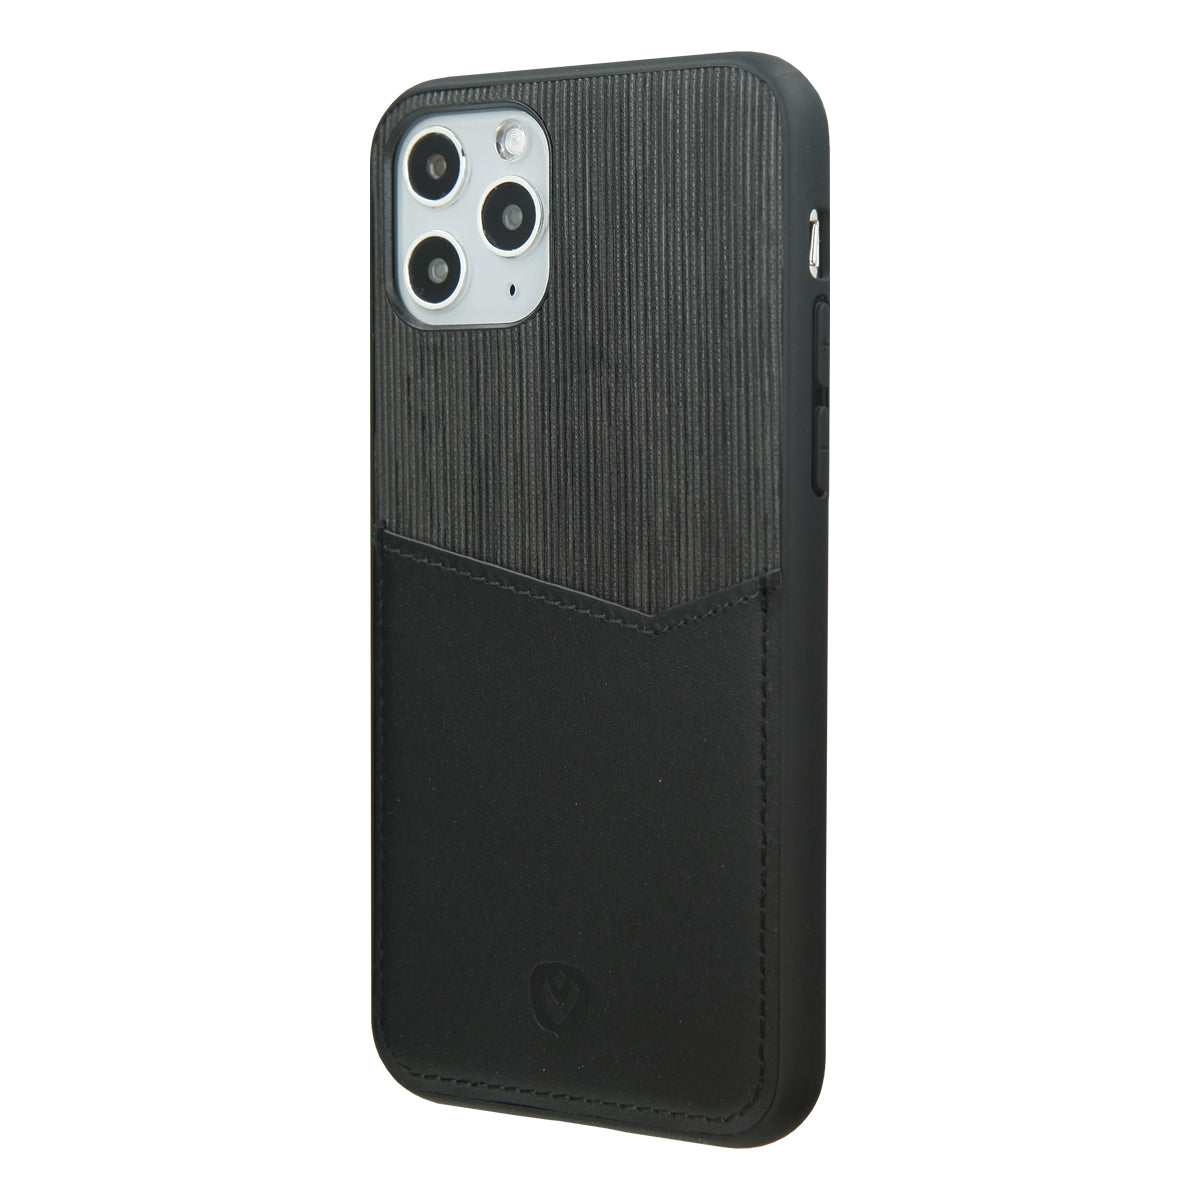 Back Cover Card Slot Black iPhone 11 Pro Max